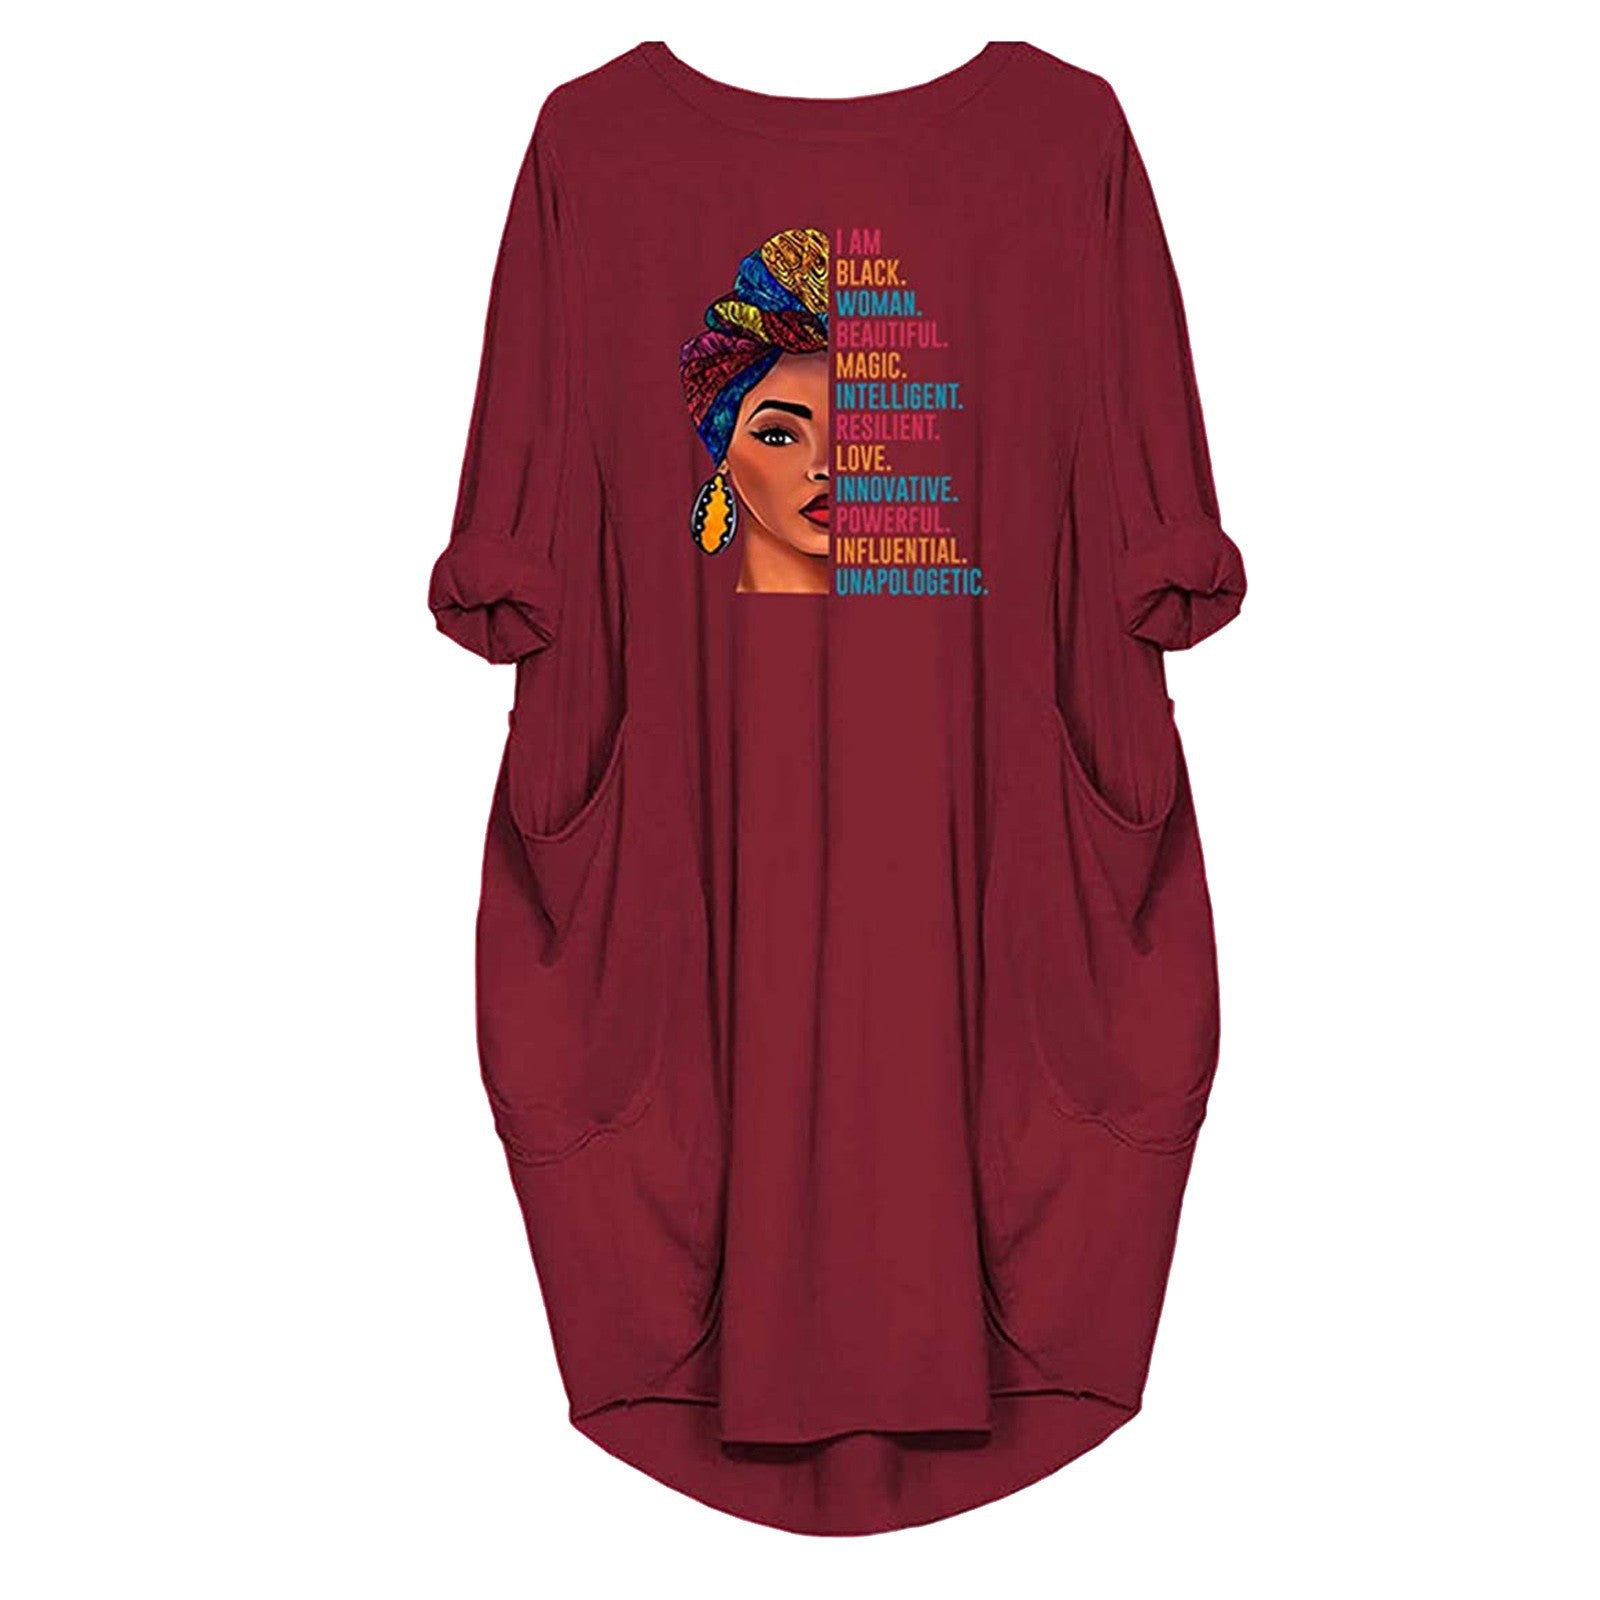 African Casual Round Neck Plus Sizes Top Blouses-Women Blouses-Wine Red-S-Free Shipping at meselling99